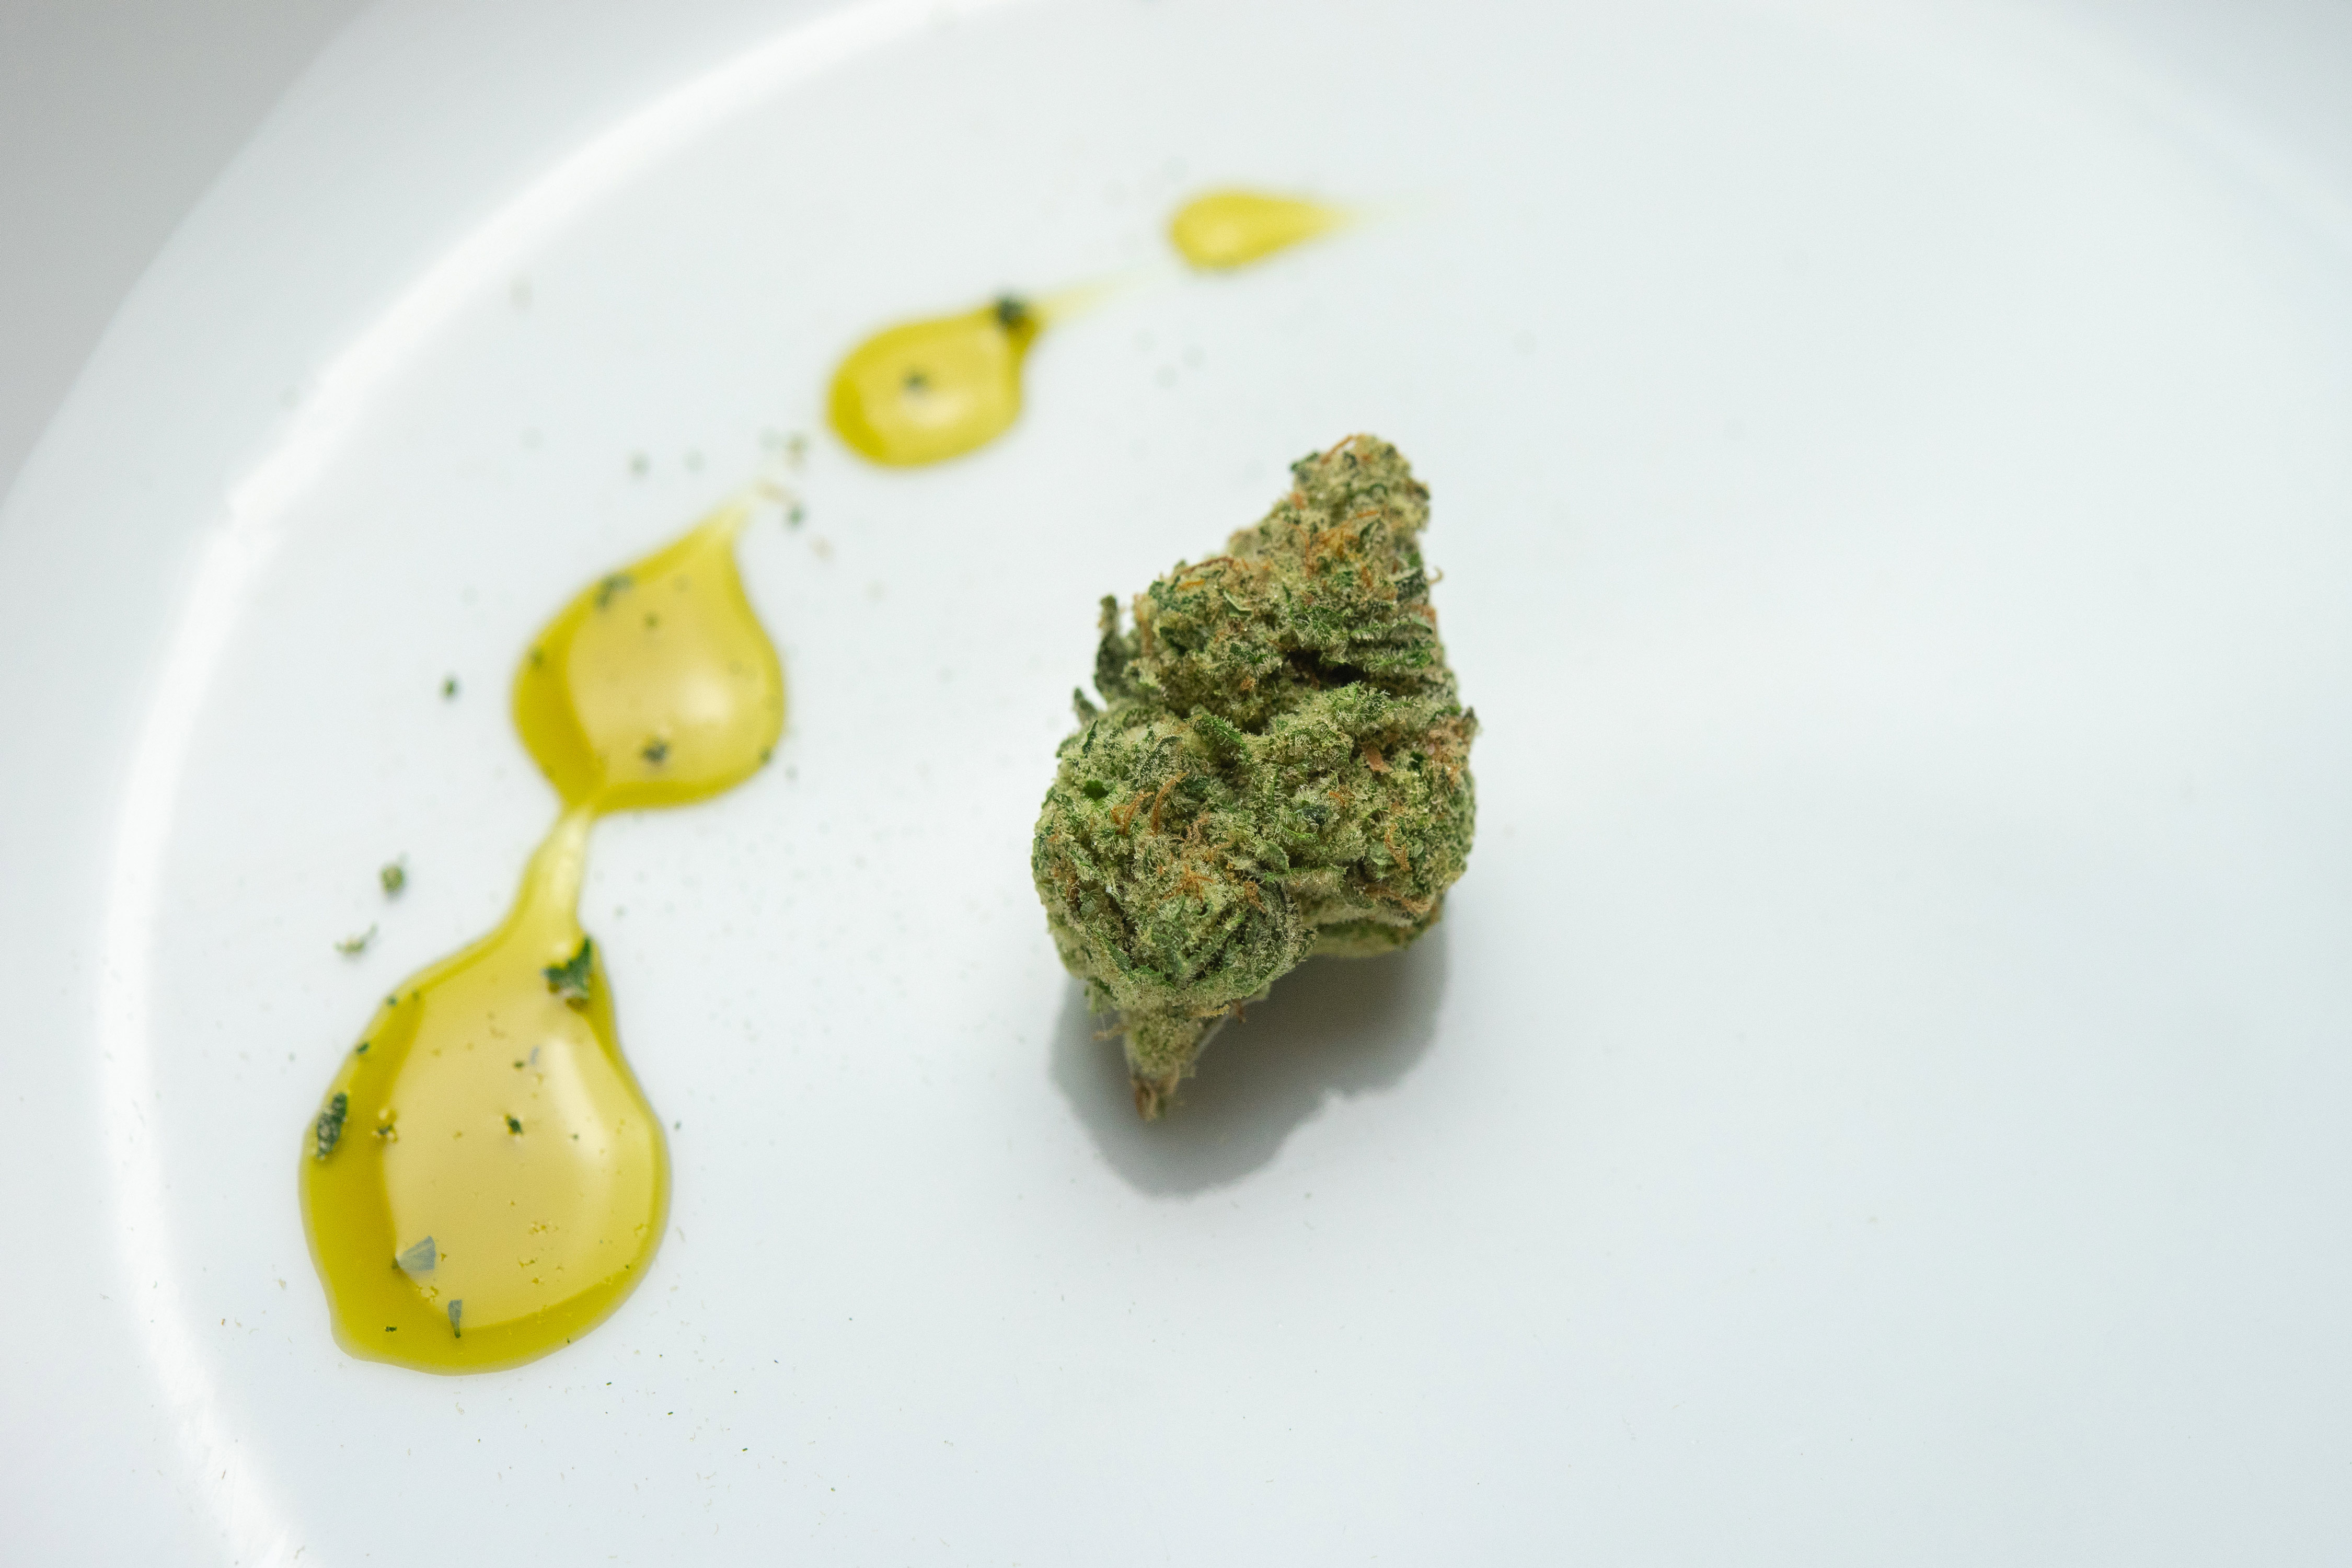 publish it under the following license: English Cannabis Nug on Plate with CBD Oil author name string: Sherpa SEO Wikimedia username: Sherpa SEO URL: https://commons